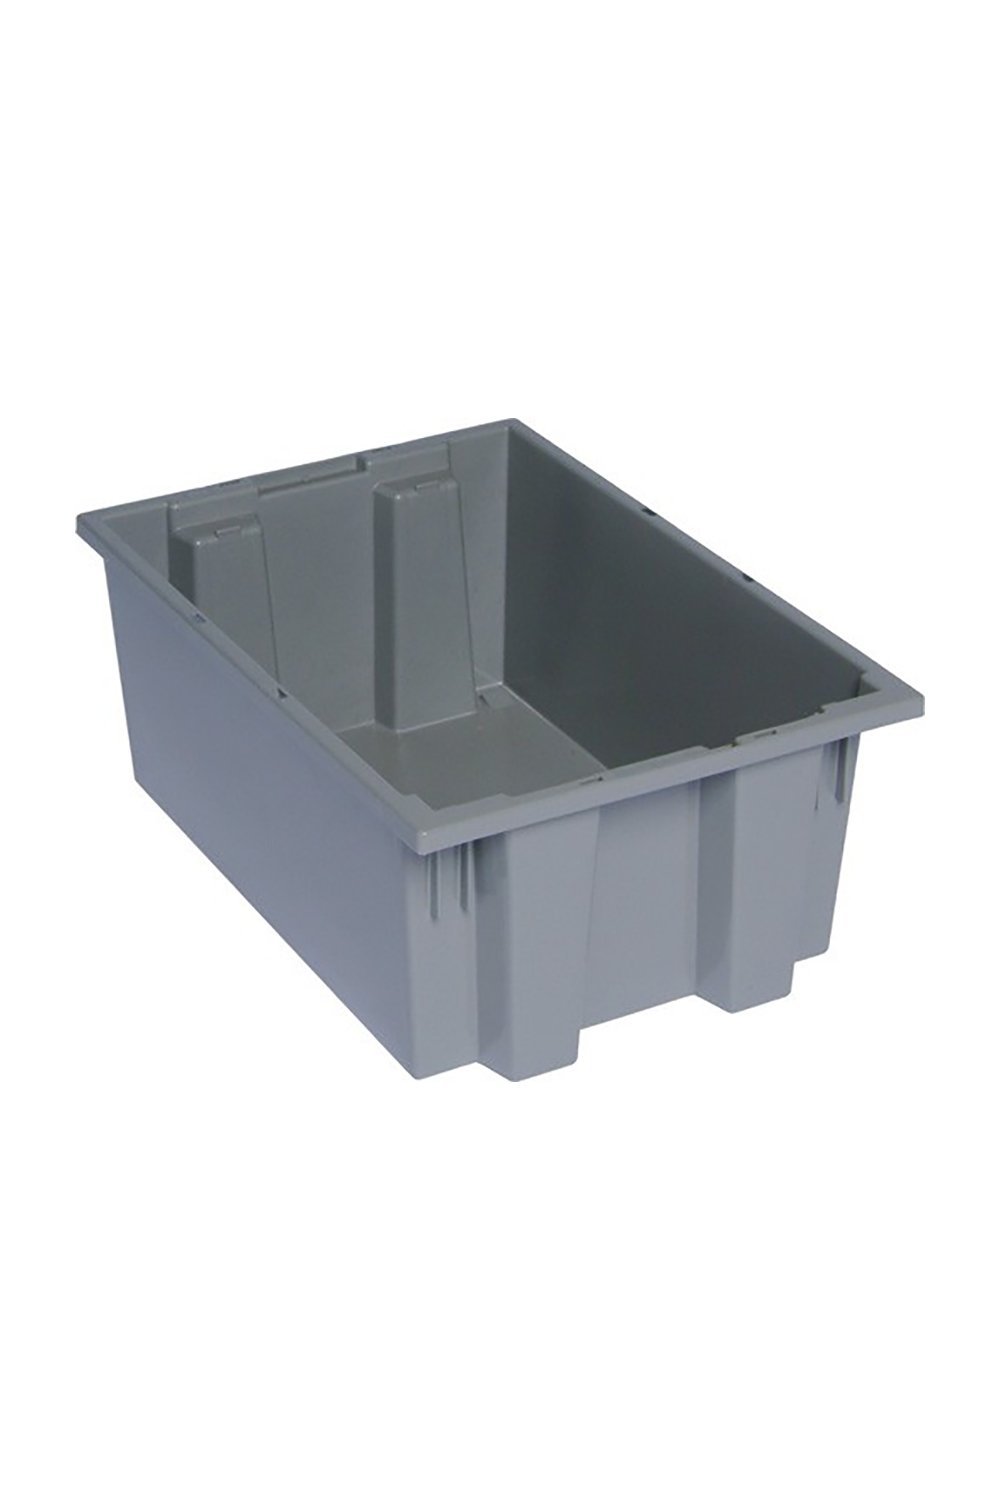 Stack and Nest Tote Bins & Containers Acart 19-1/2"L x 13-1/2"W x 8"H Gray 